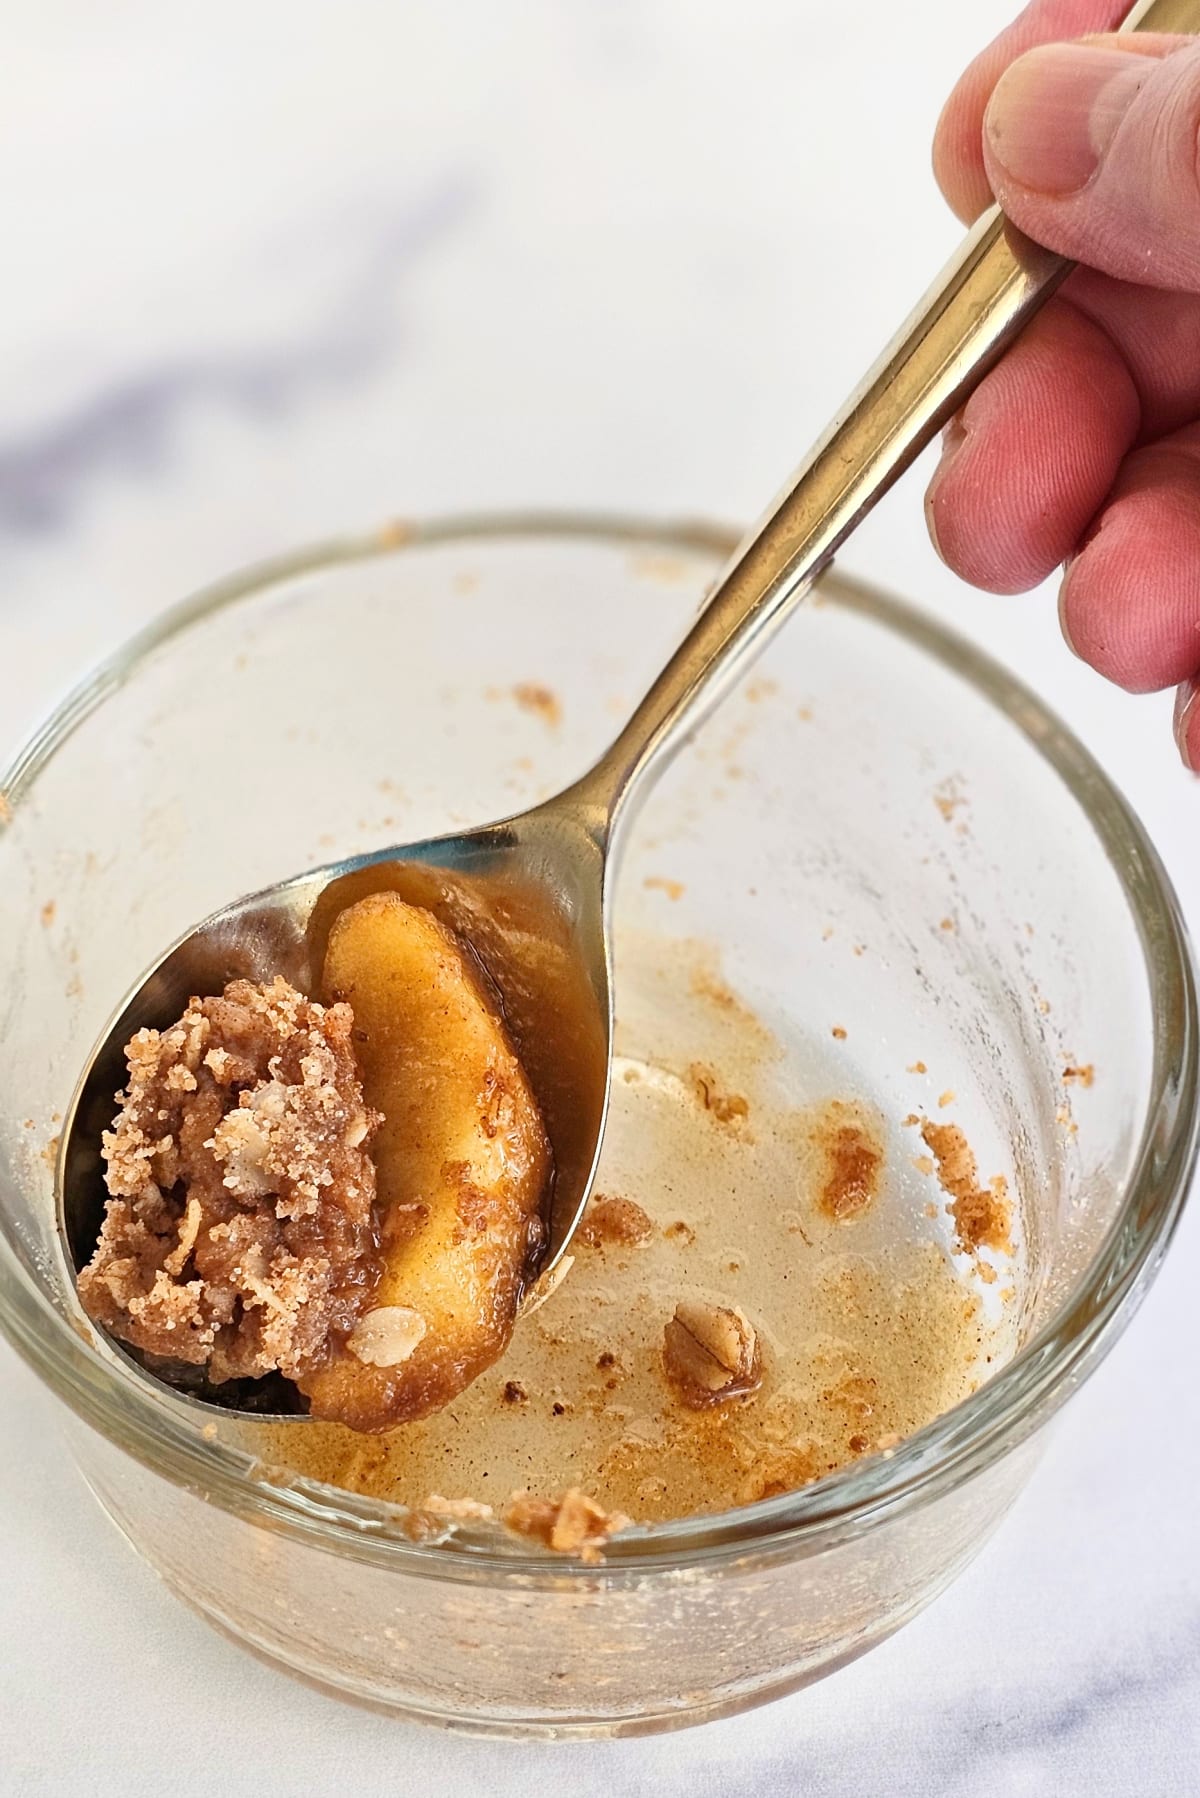 Hand holds a spoon containing the last bit of apple crisp scooped from a glass bowl on a white marble countertop